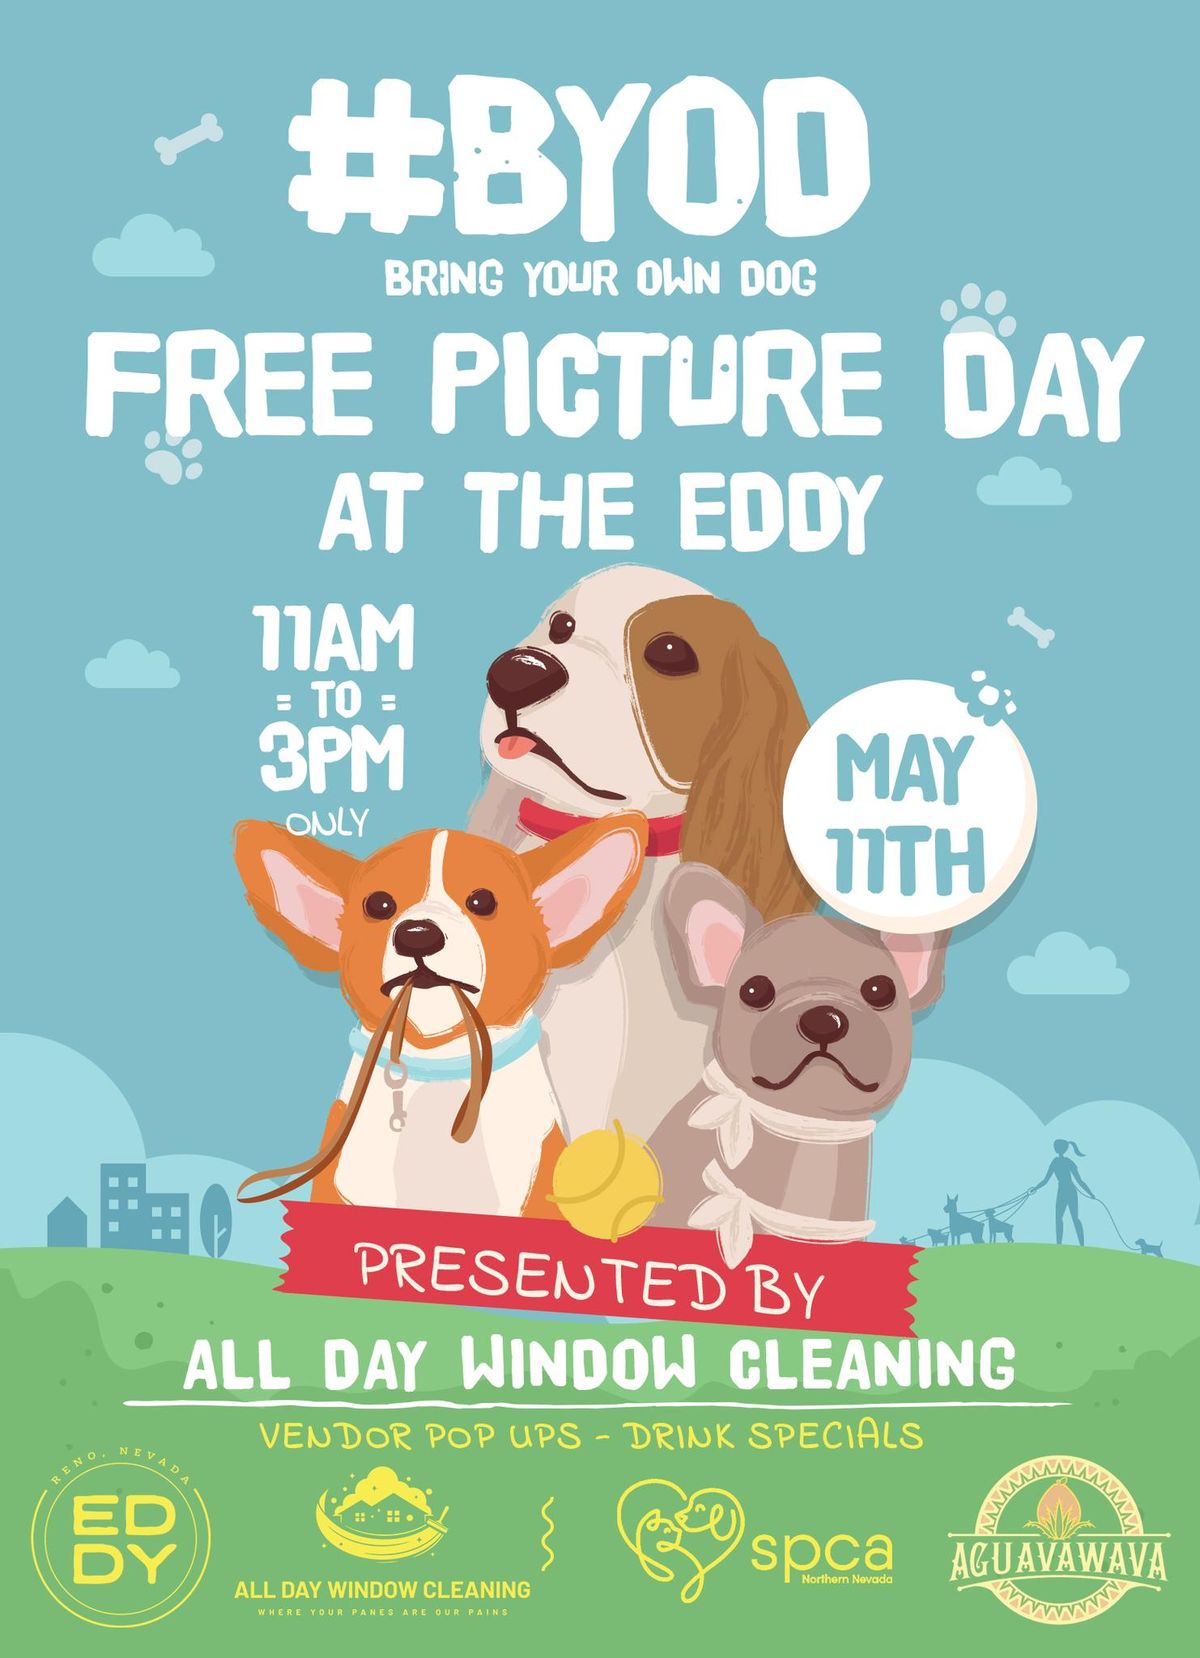 Free Photo Day With Your Dog At The Eddy!